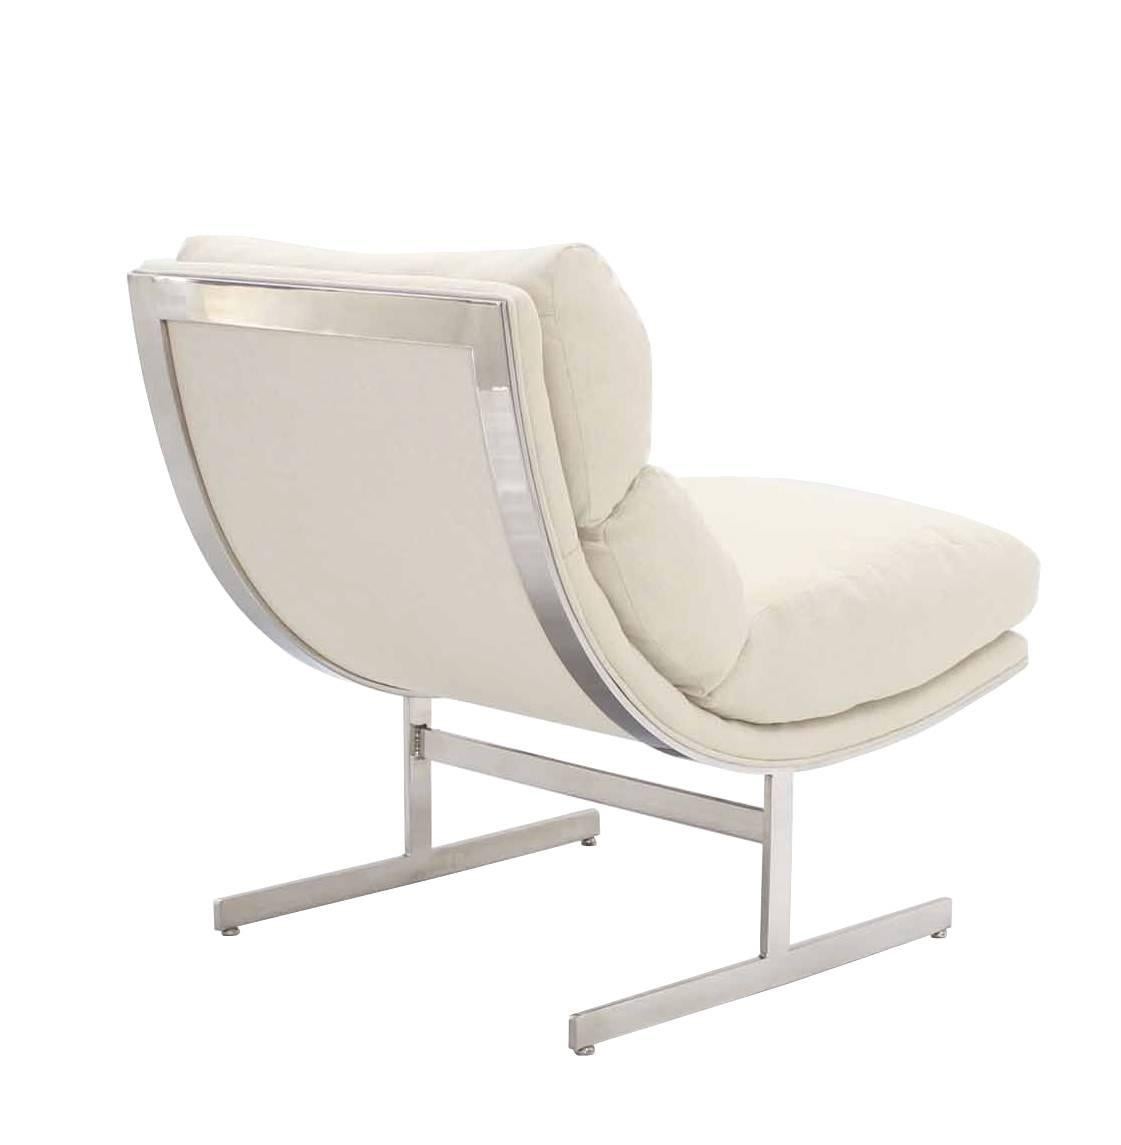 Scoop Chrome Lounge Chair New Upholstery In Excellent Condition For Sale In Rockaway, NJ